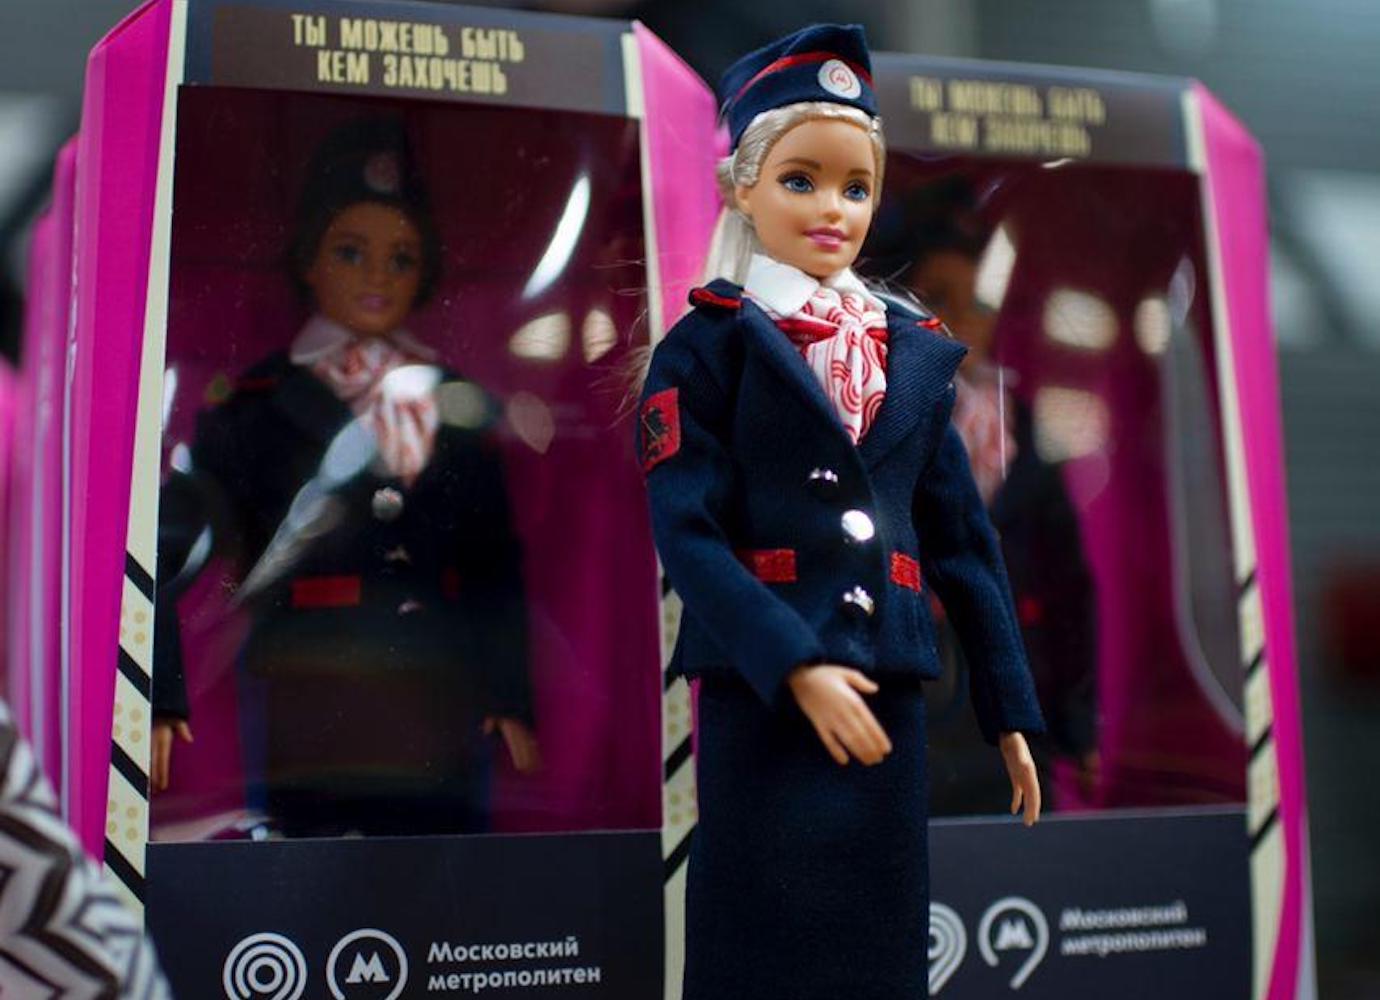 'You can be anything you want to be': Moscow metro celebrates new women drivers by launching its own Barbie doll